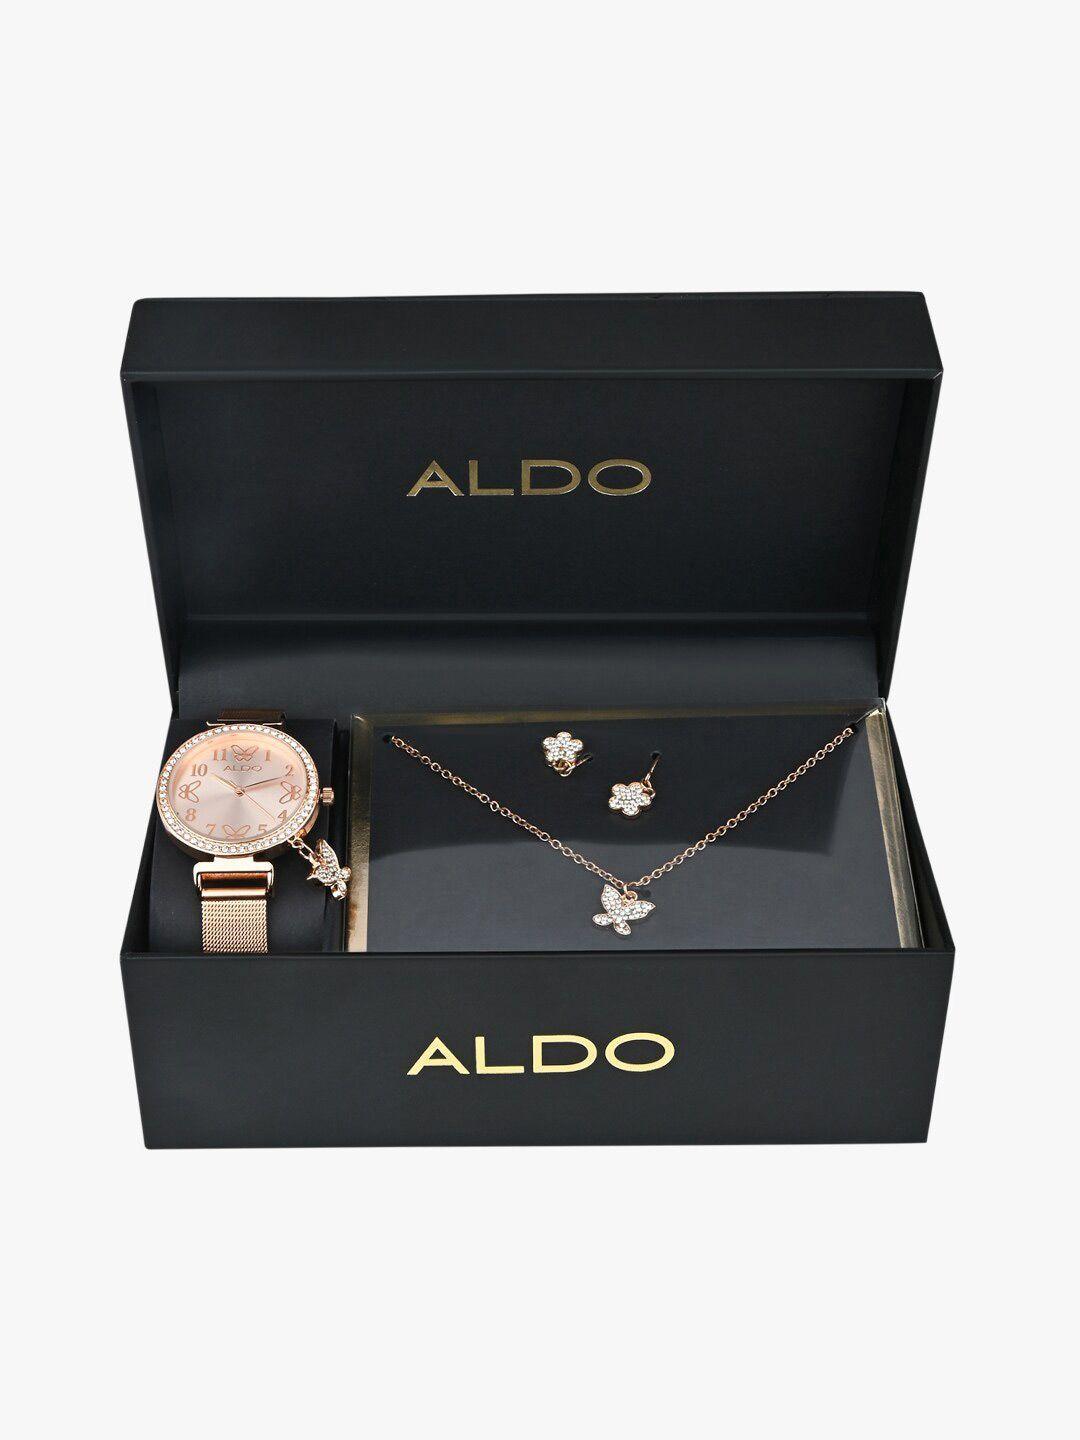 aldo women embellished dial watch gift set abilith653